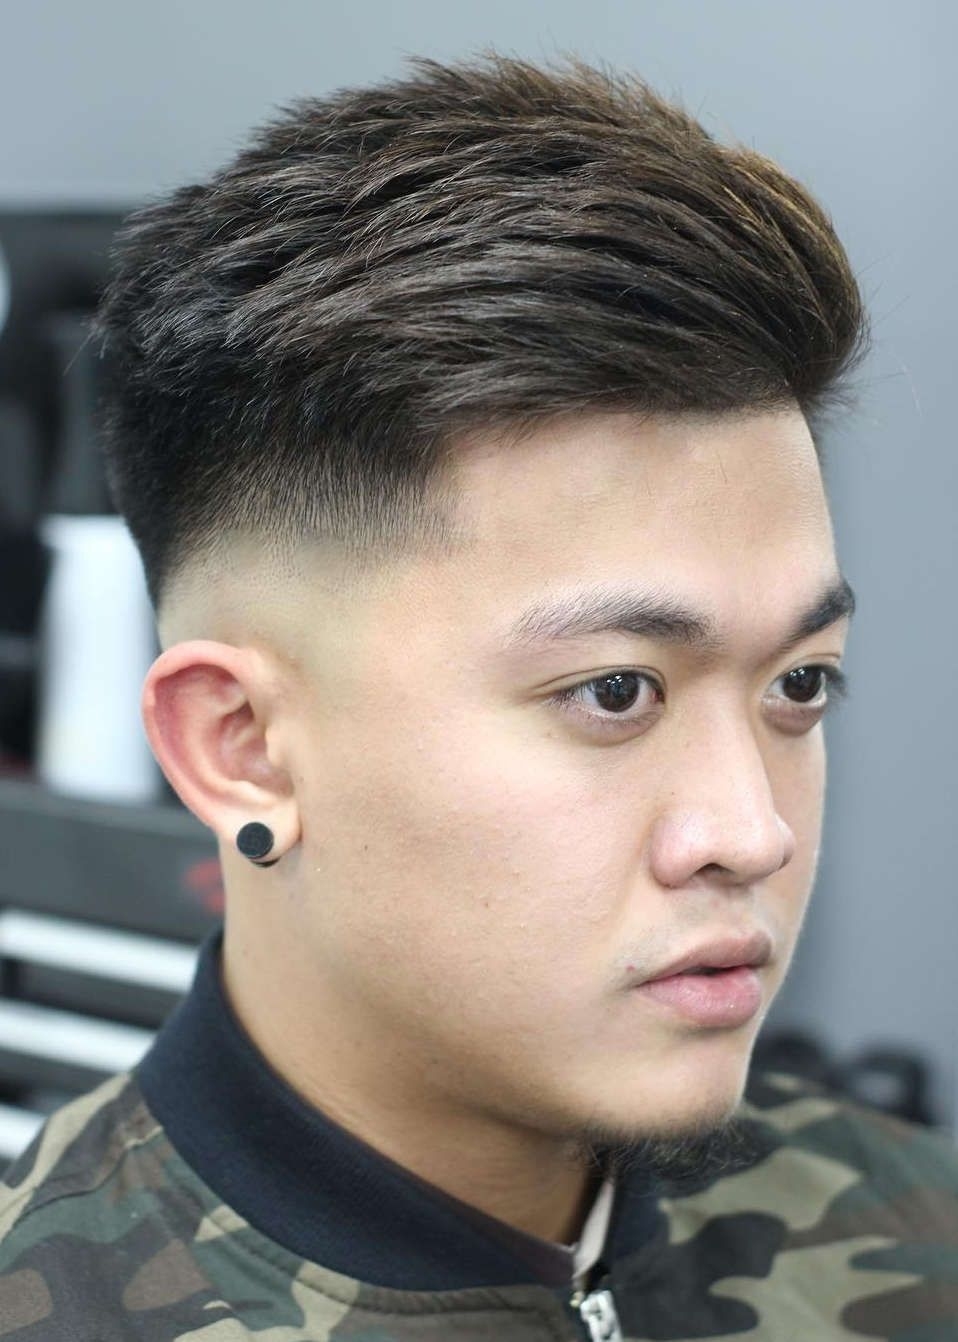 17 Most Popular Asian Hairstyles Men 2018 Yet You Know | Asian inside Asian Hairstyles Men